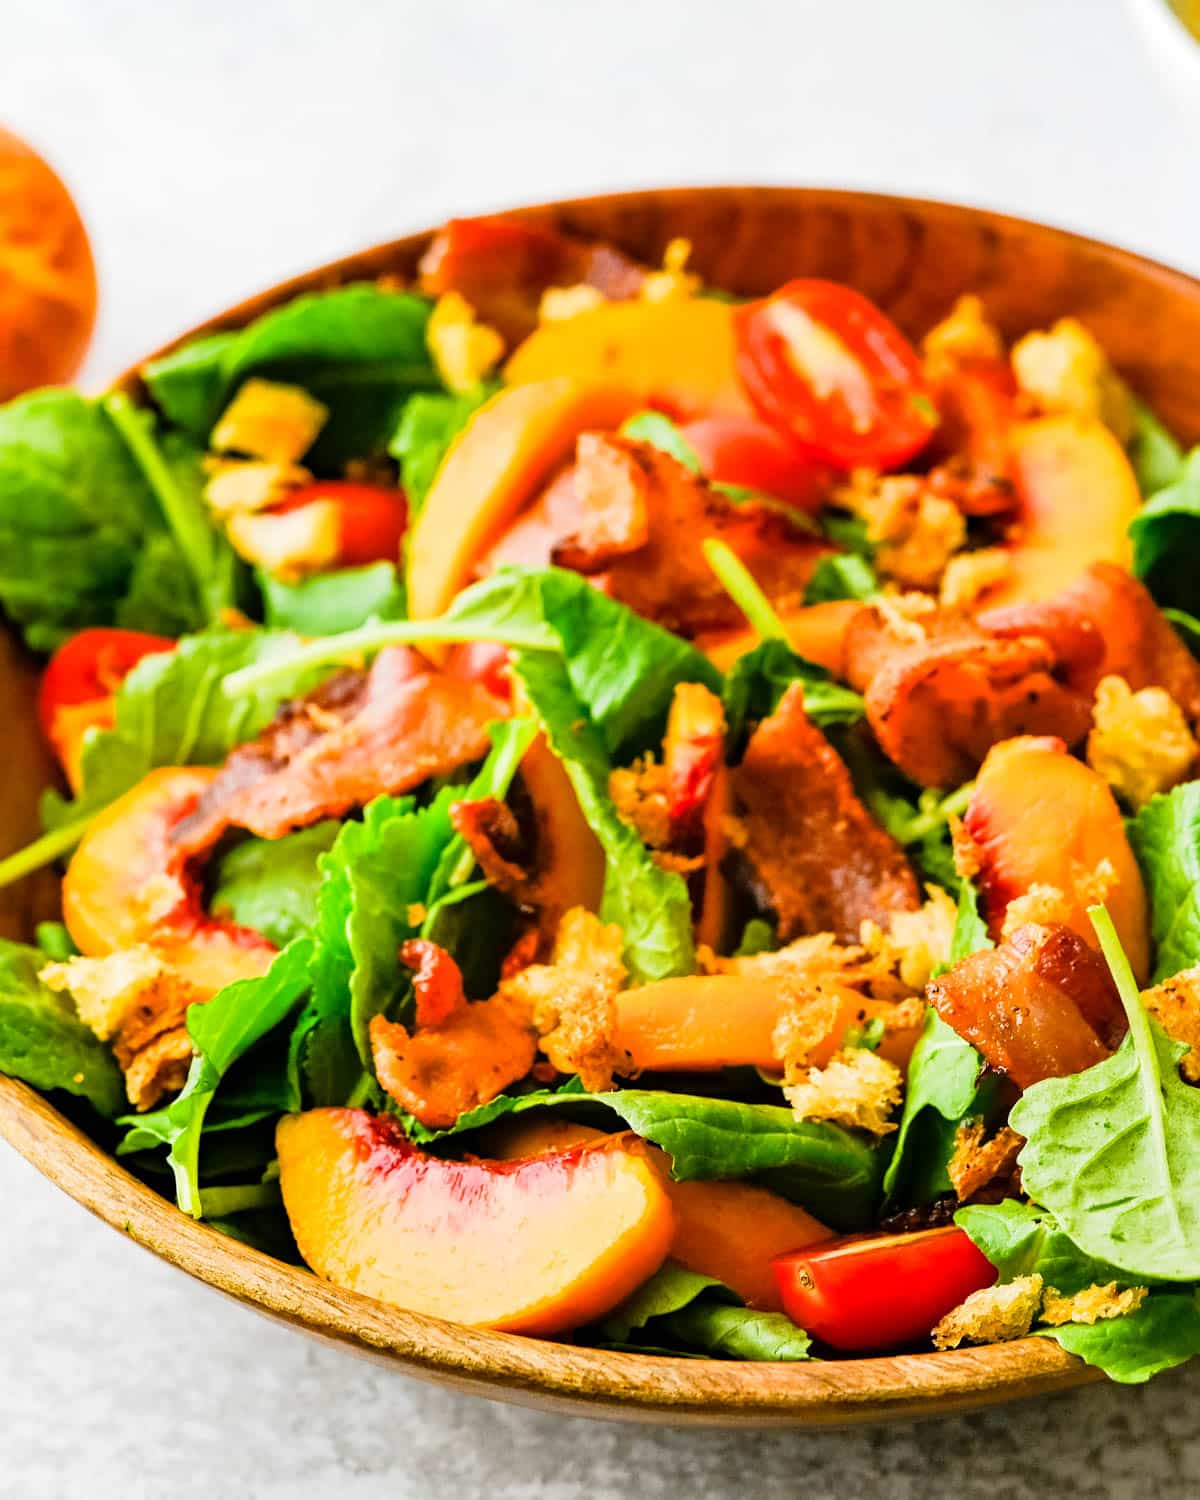 A bowl of peach and kale salad with bacon.